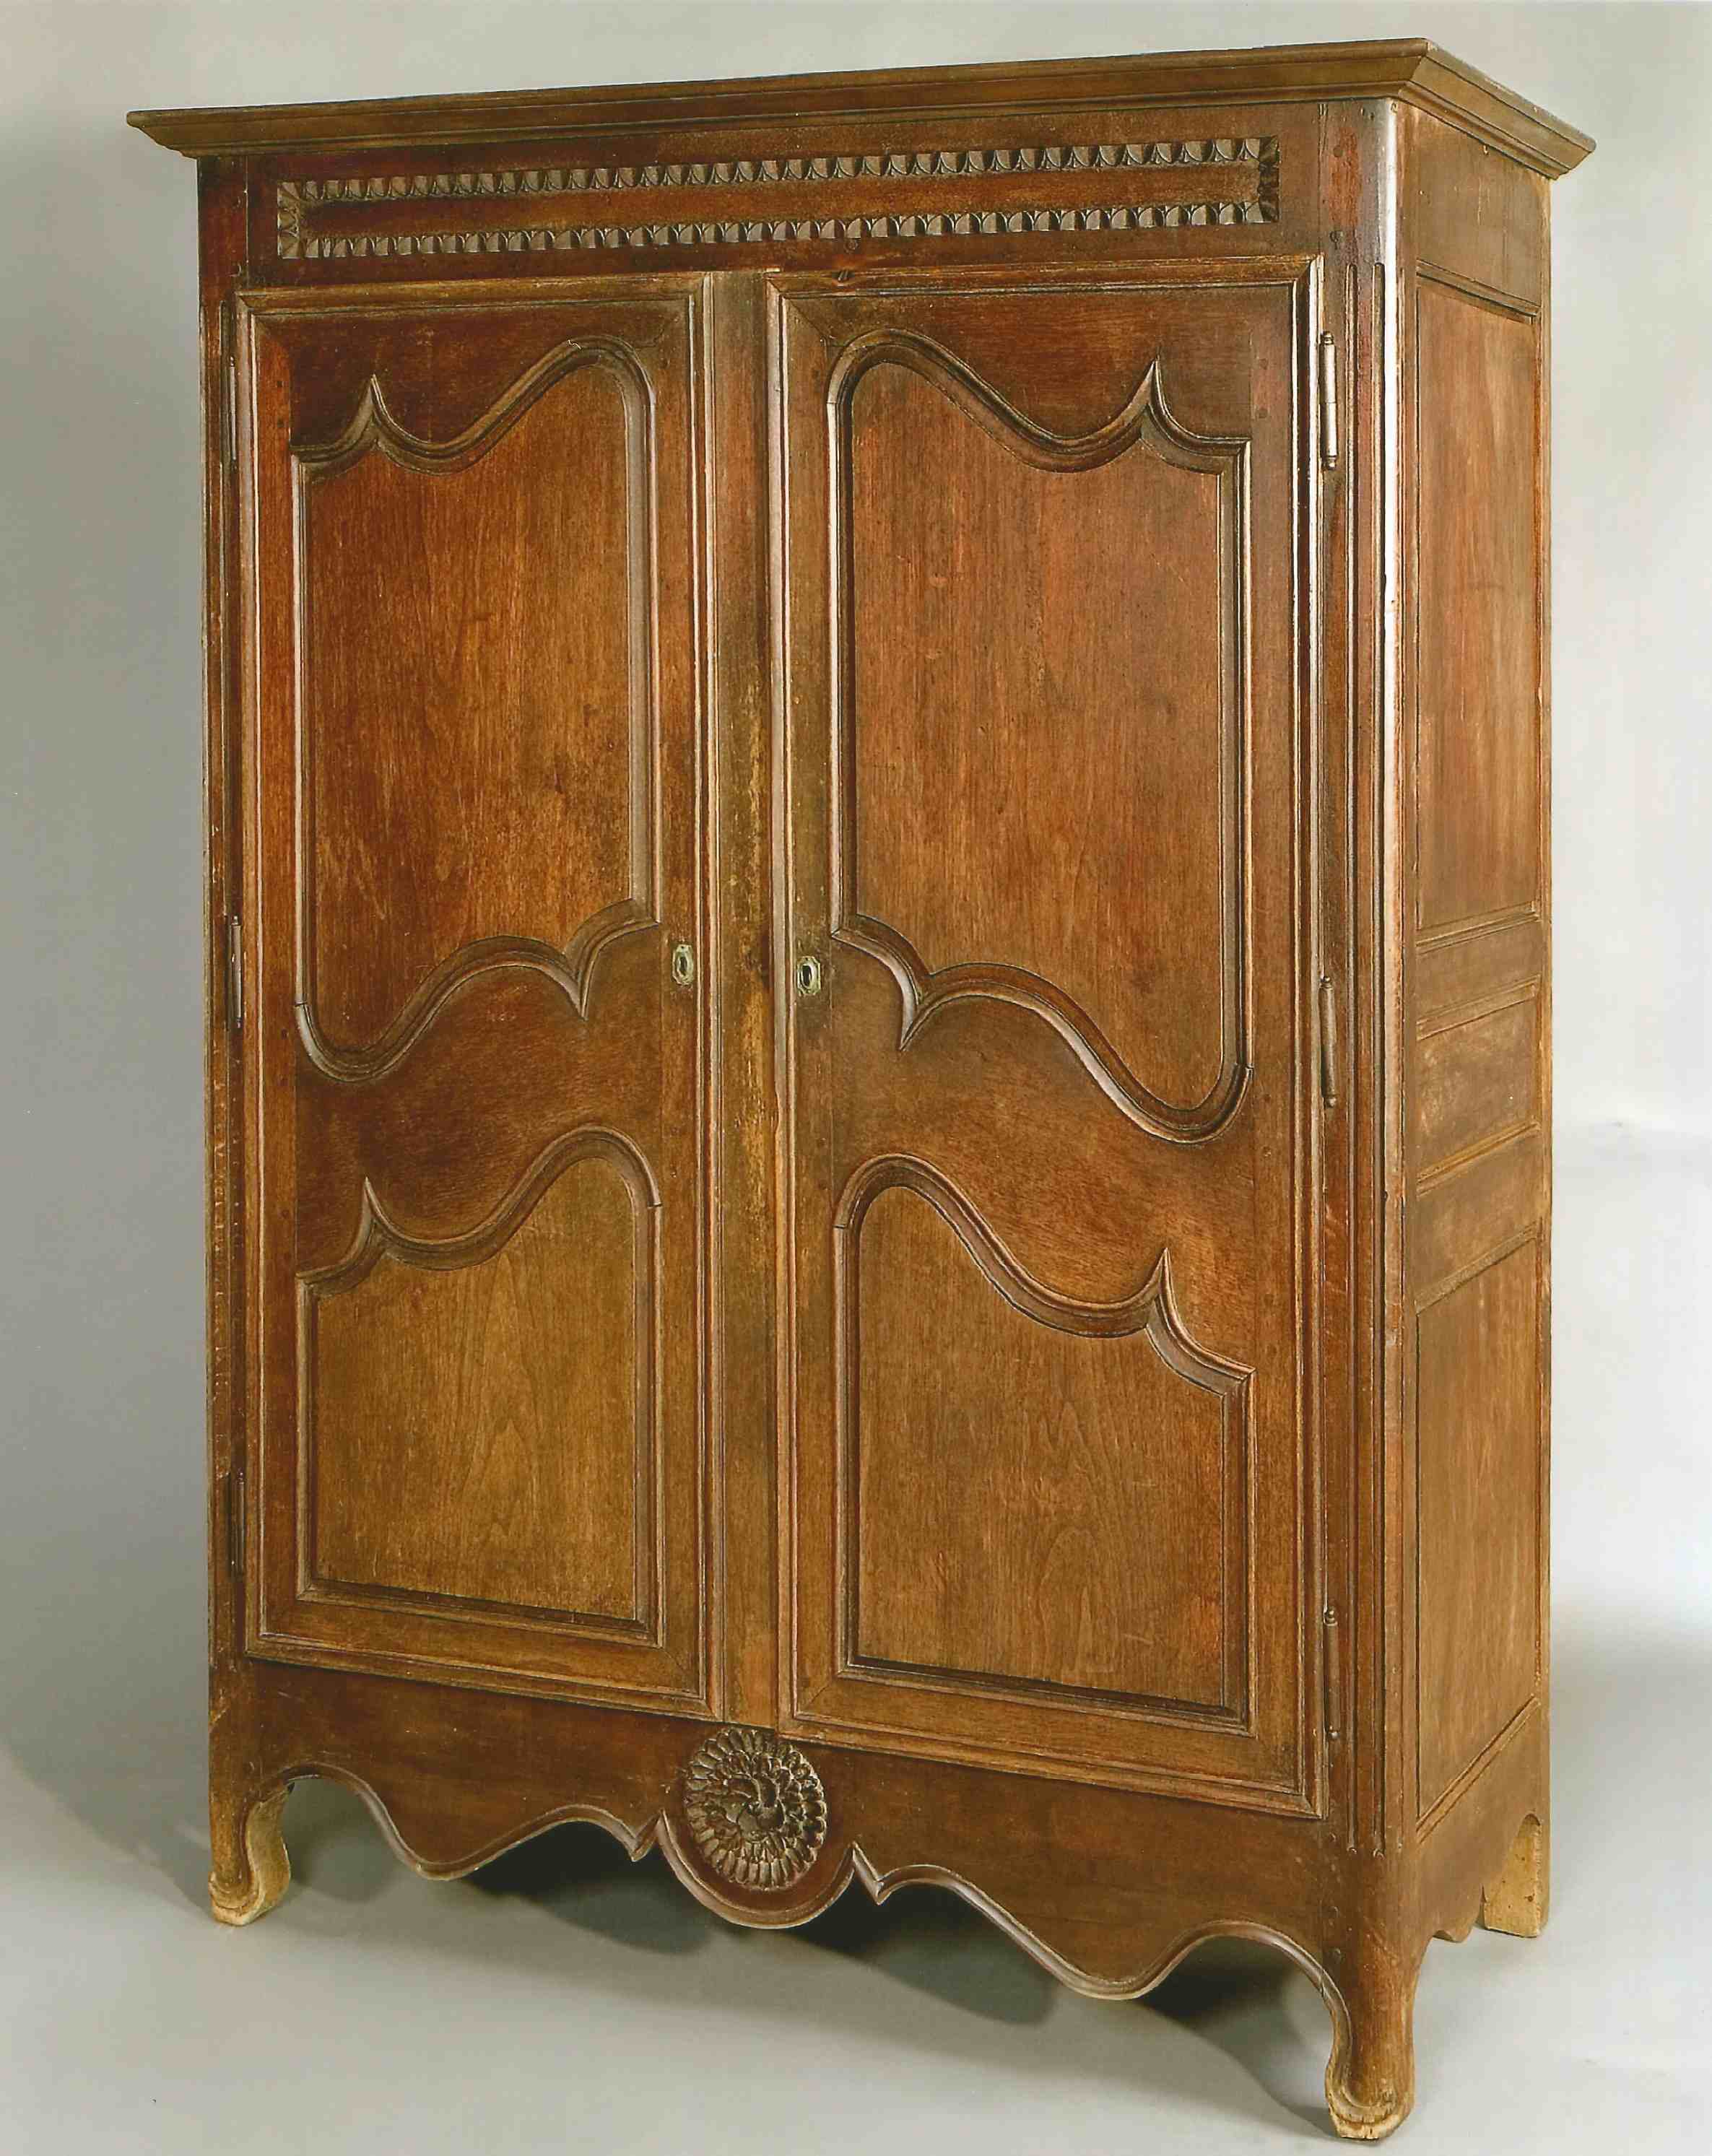 18th Century Vincennes, Indiana Armoire